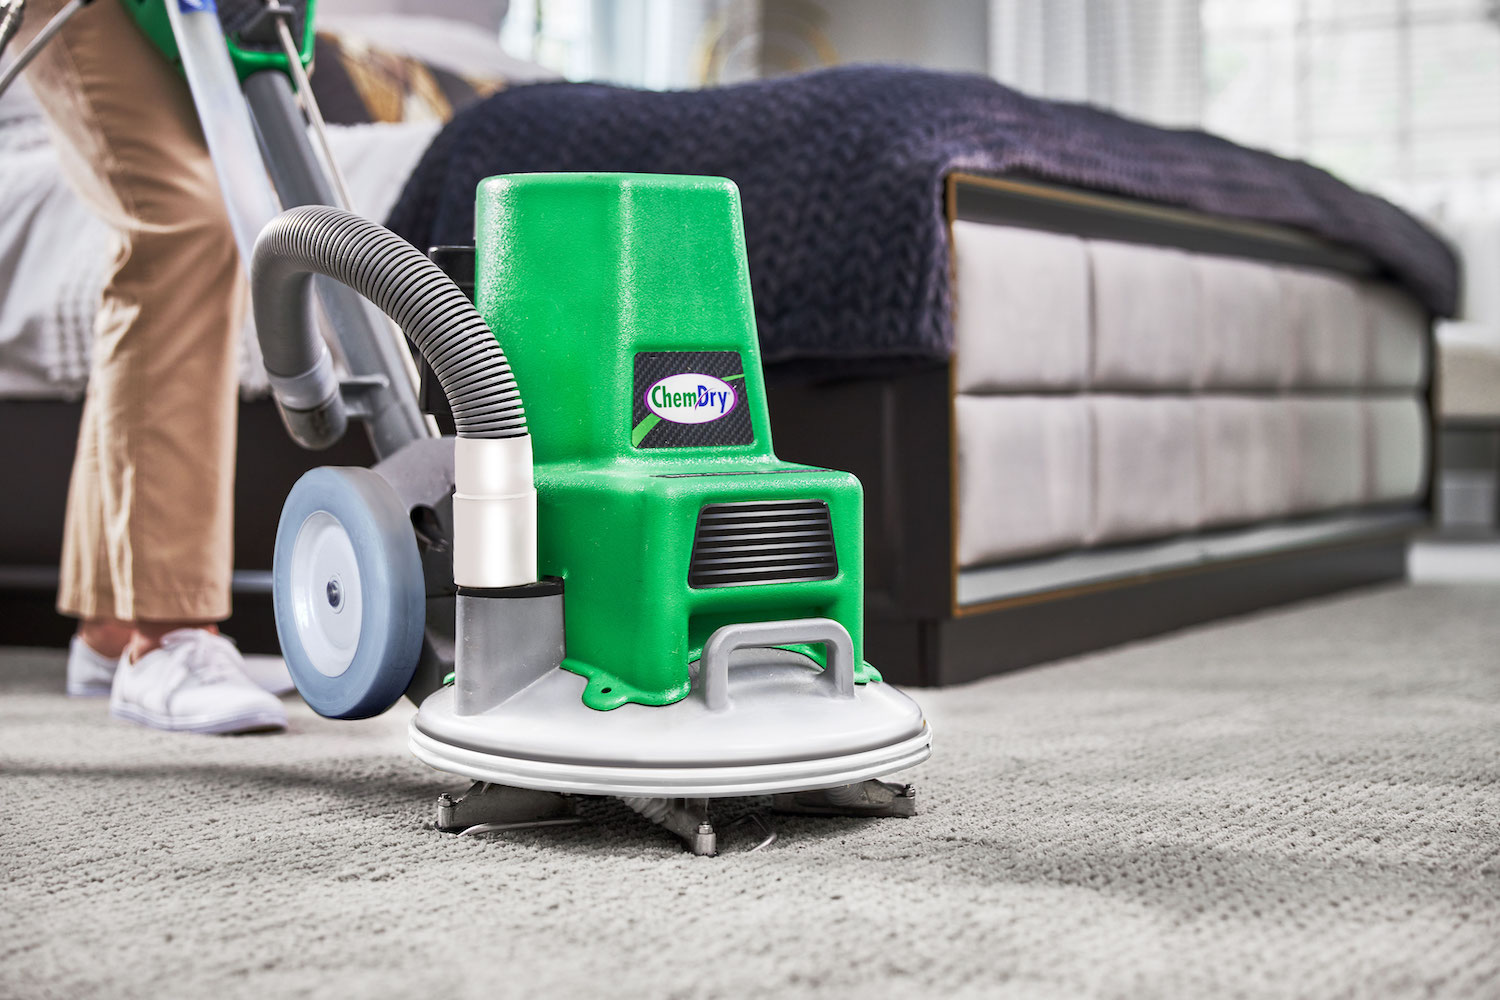 how to dry carpets after cleaning